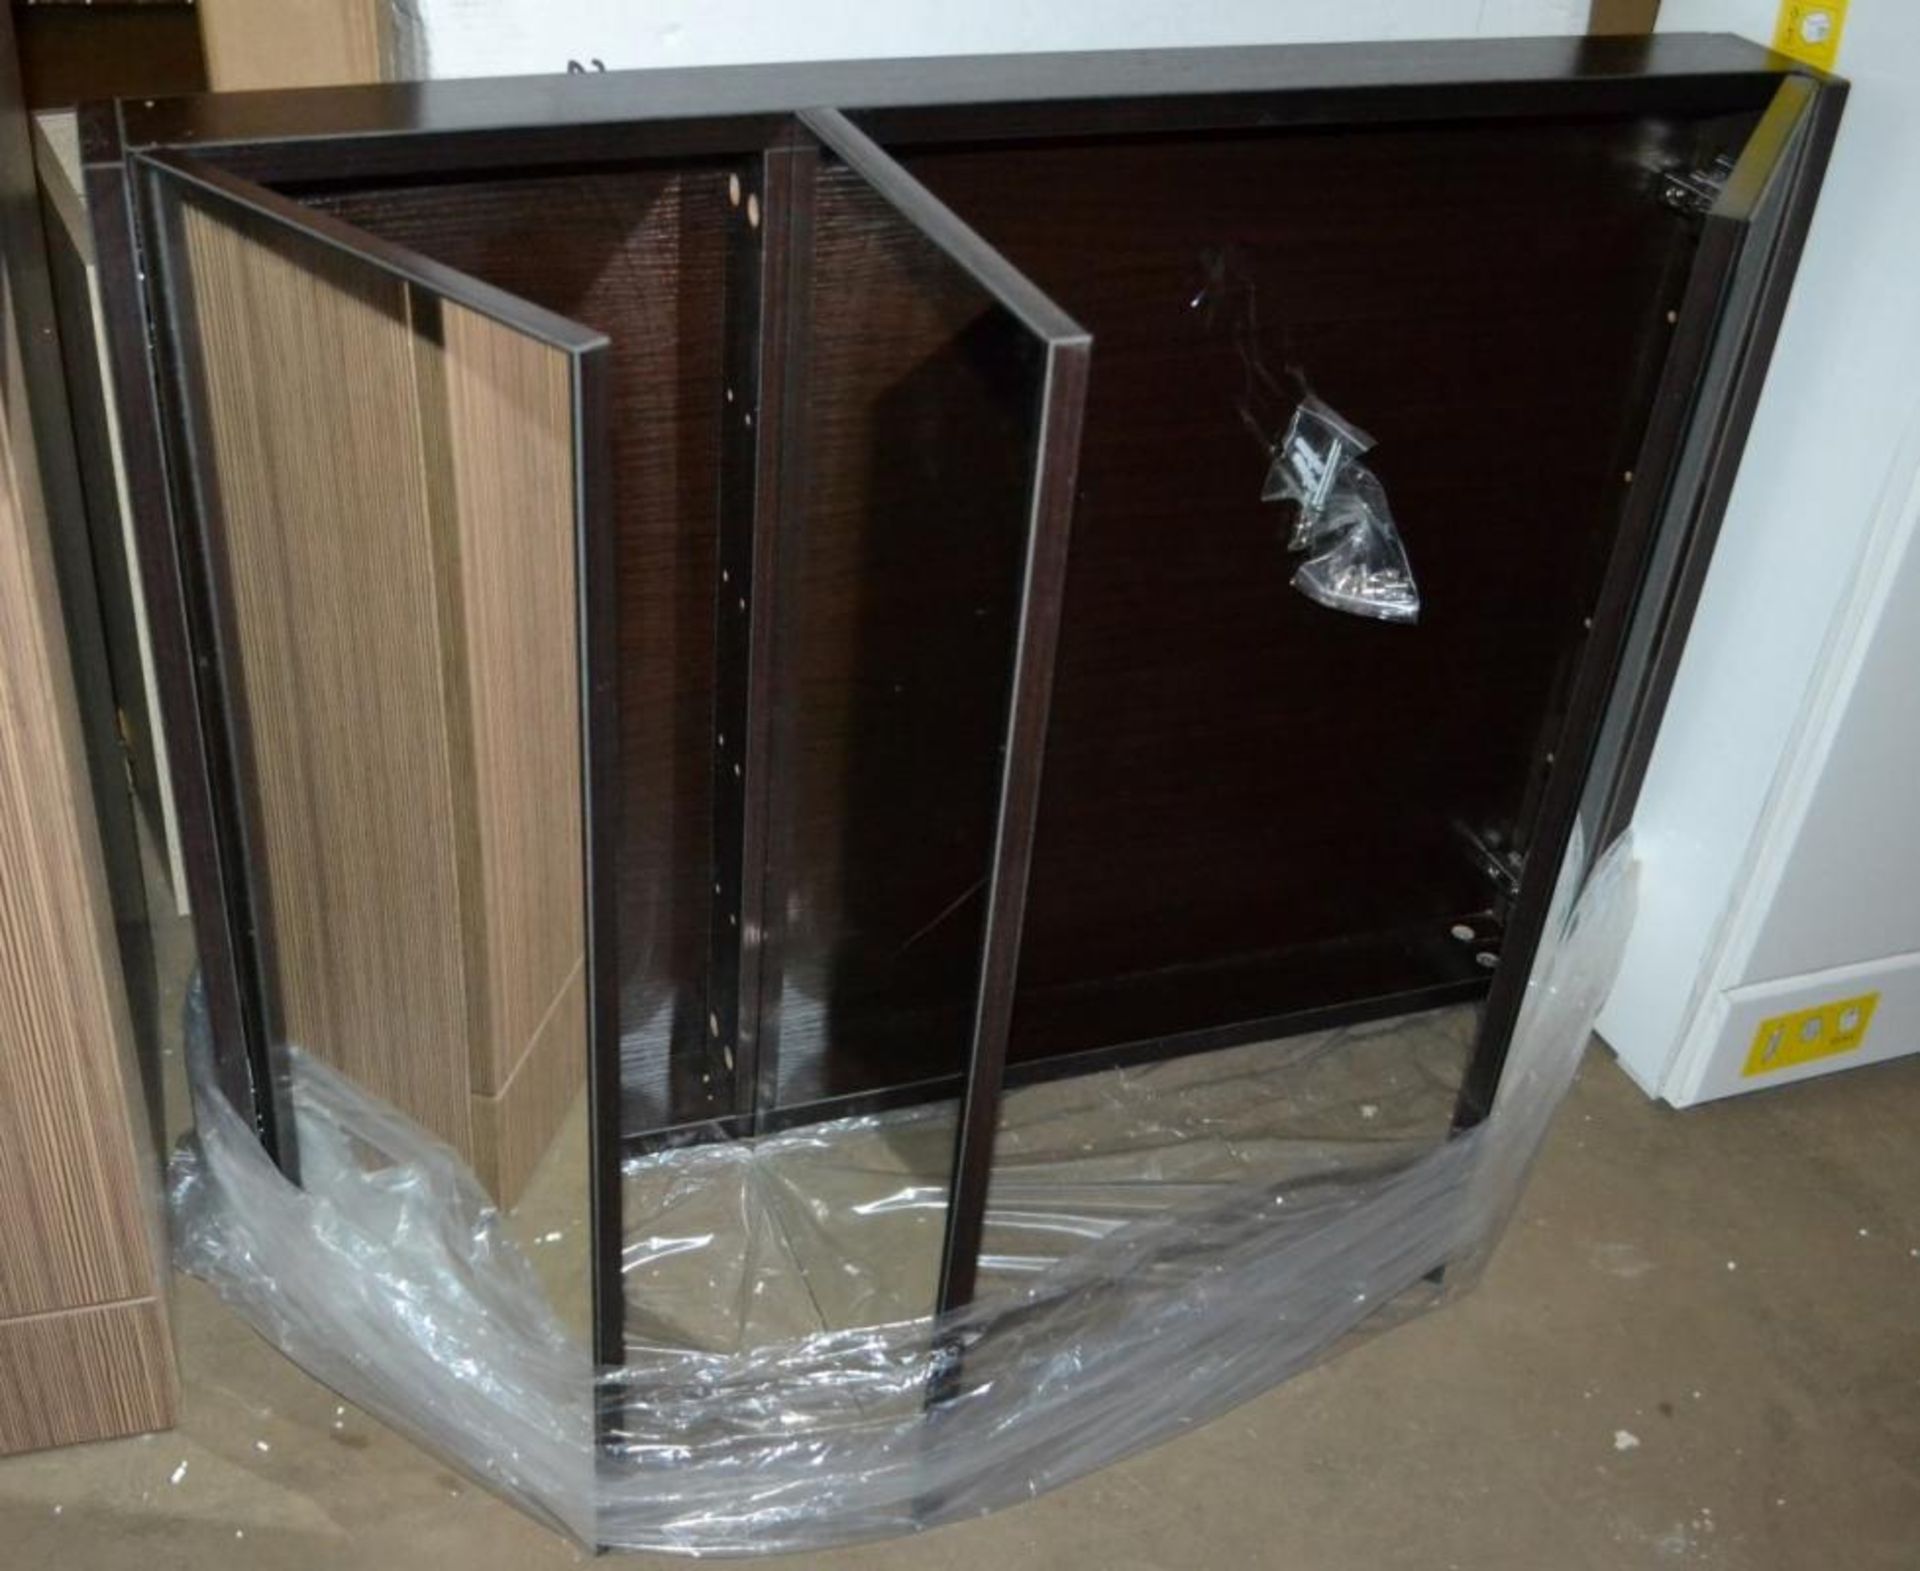 1 x Odessa Wenge 3 Door Bathroom Mirror Cabinet - Includes Sealed Bag Of Fittings - New / Unused Sto - Image 8 of 10